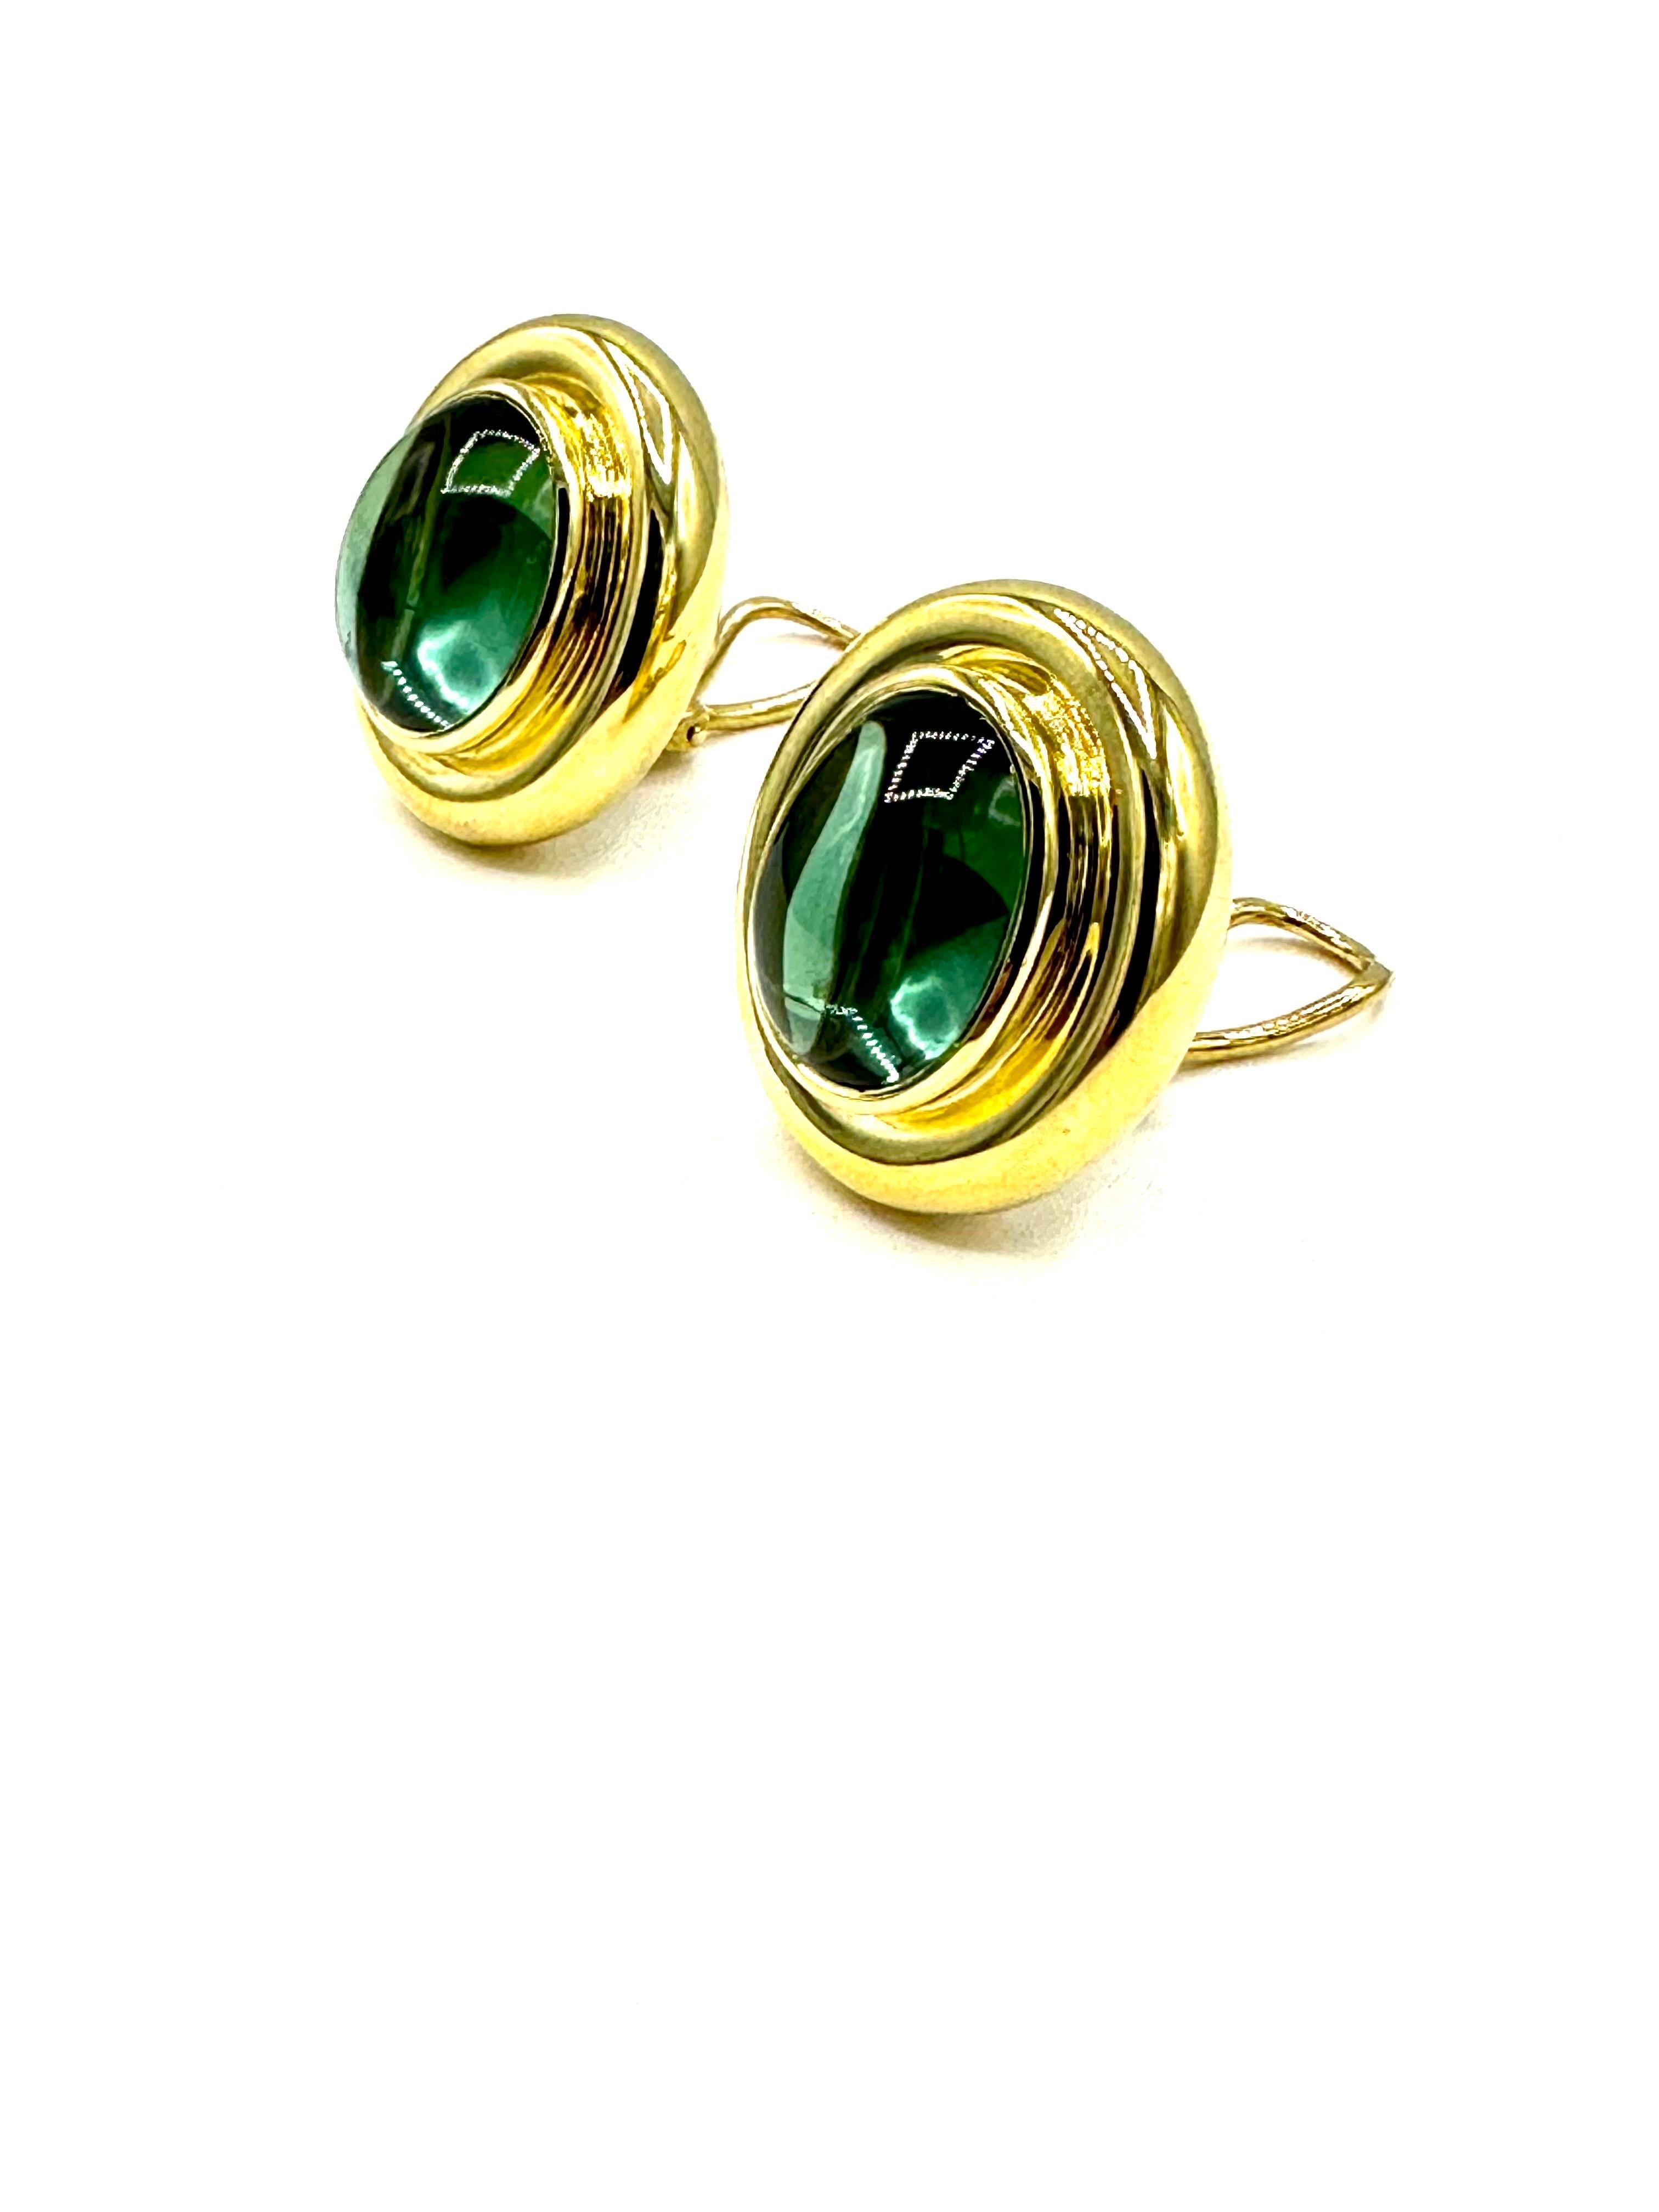 A pair of Paloma Picasso for Tiffany & Co. green Tourmaline lever back and post earrings in 18K yellow gold.   The two cabochon cut green Tourmalines have a total weight of 24.50 carats.  They are bezel set in a yellow gold oval frame.  The back of